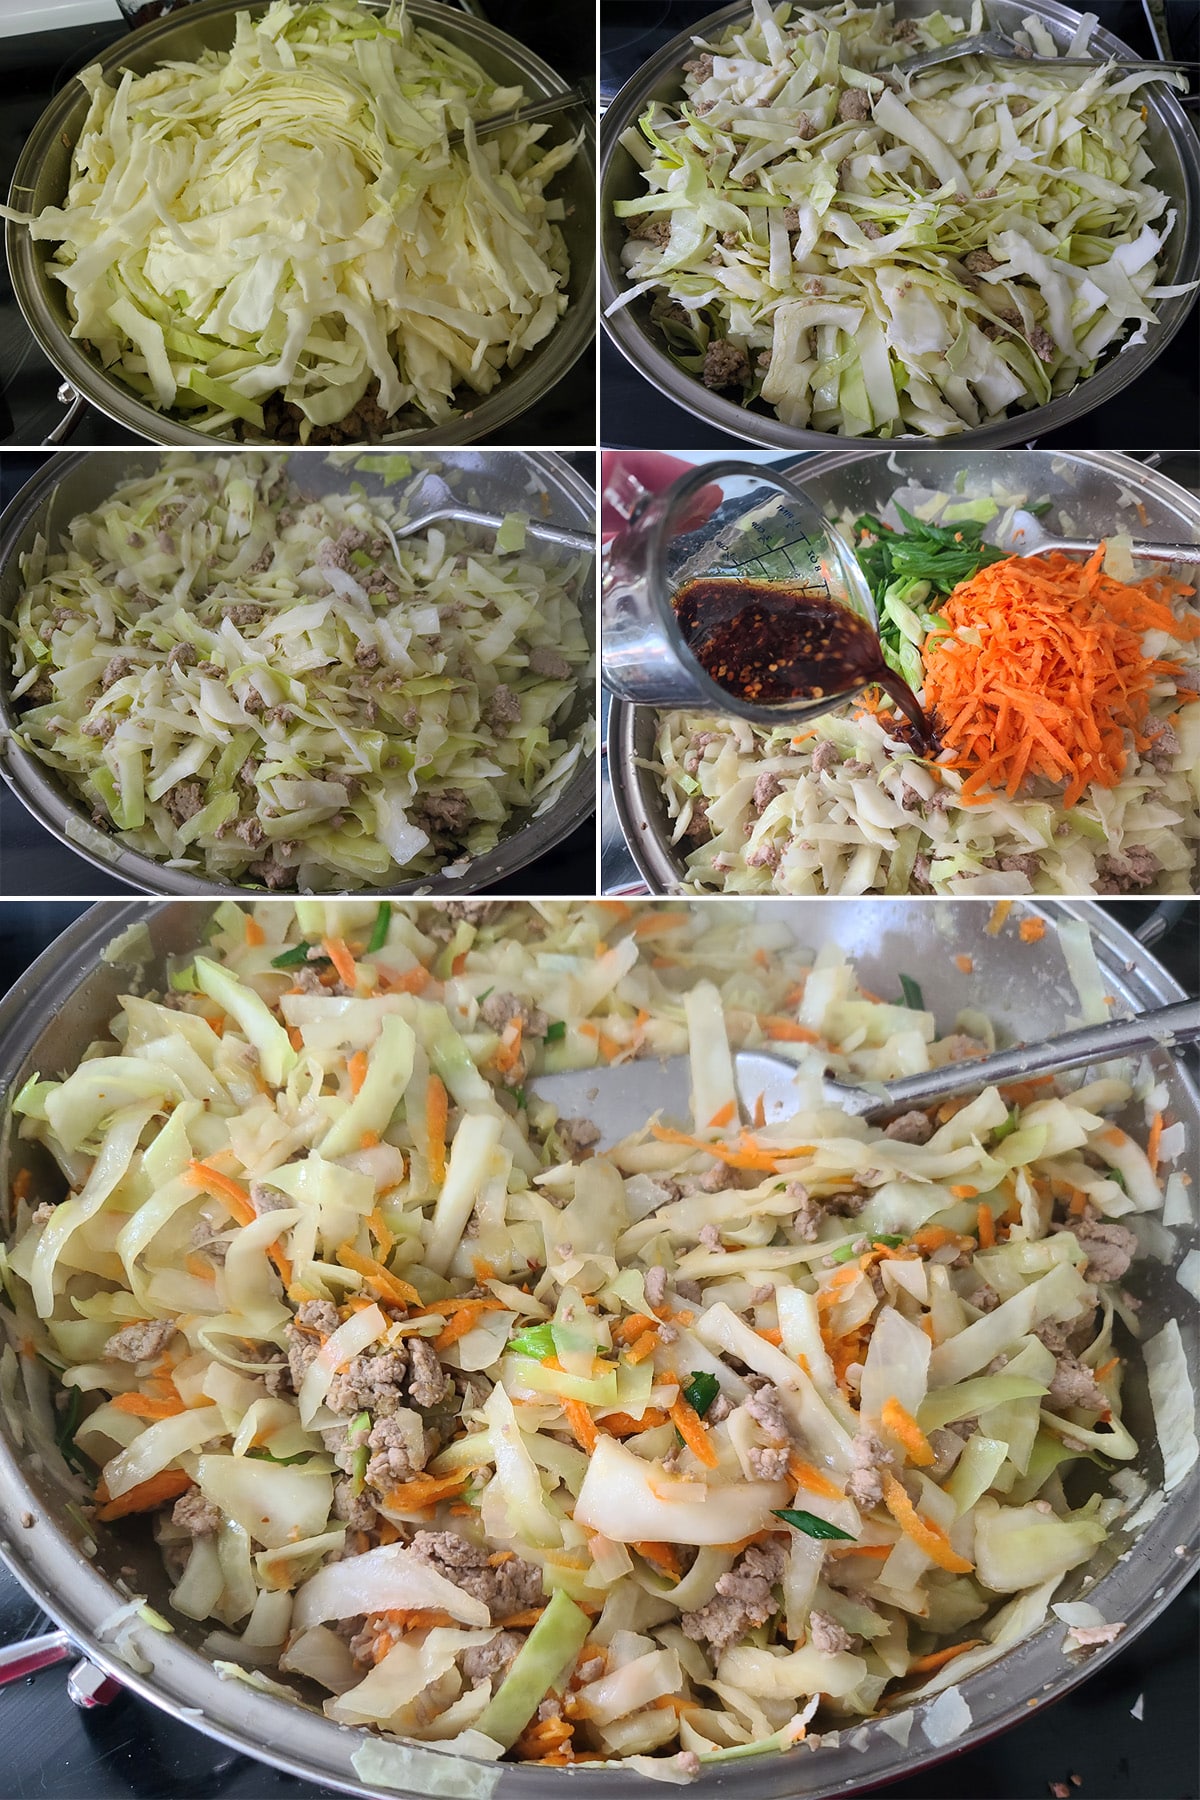 A 5 part image showing the cabbage, carrots, and onion being added to the pan and cooked down.